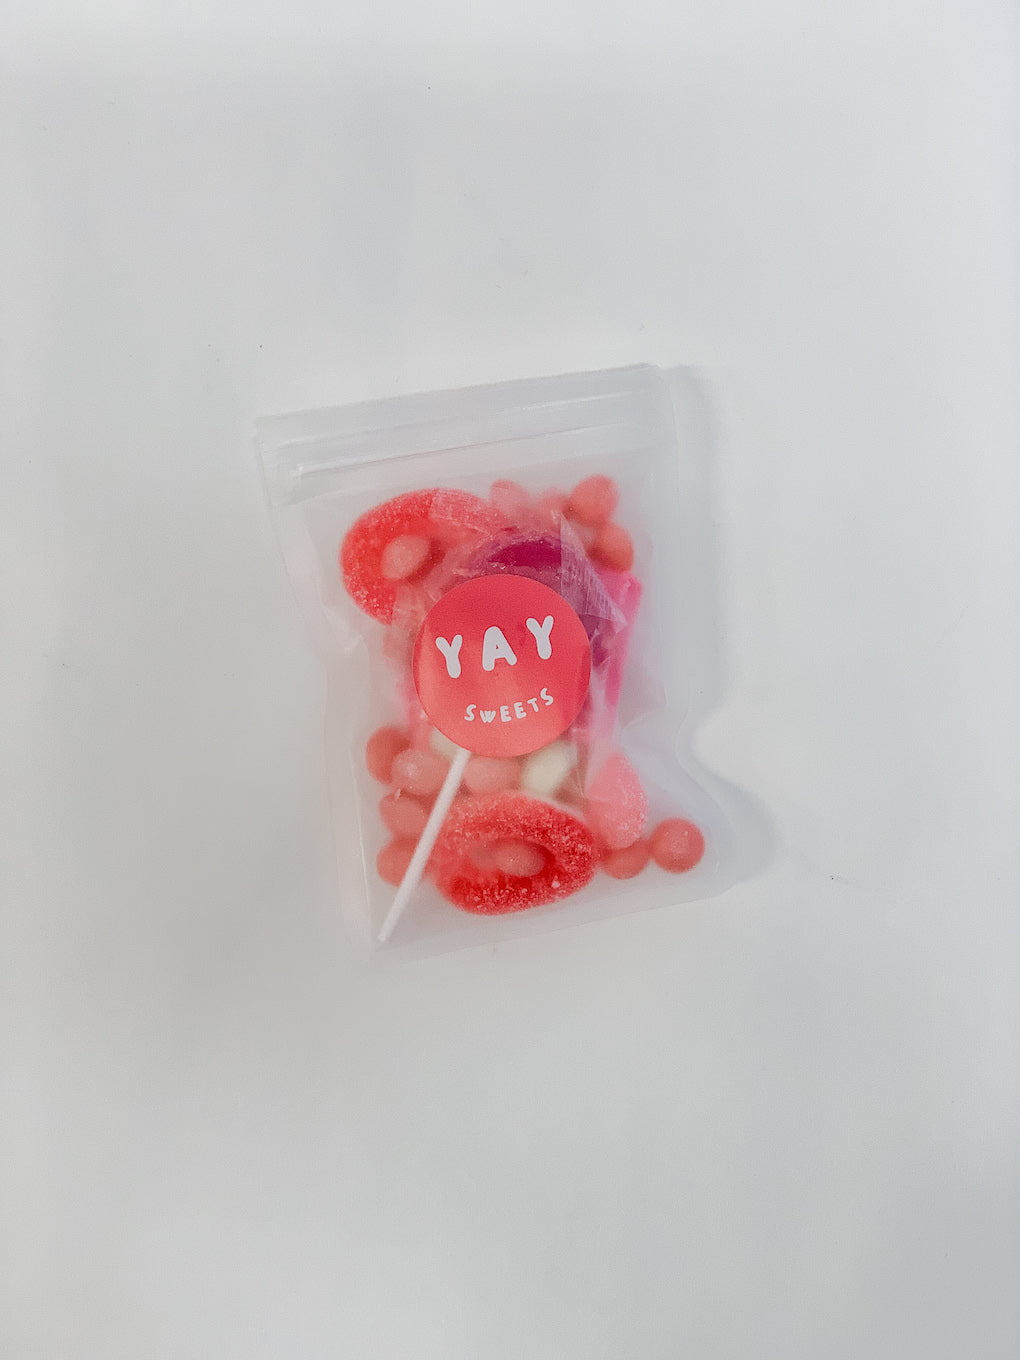 Yay Sweets Pink Candies Mix | Gift Add-On to Flowers | Perth Florist